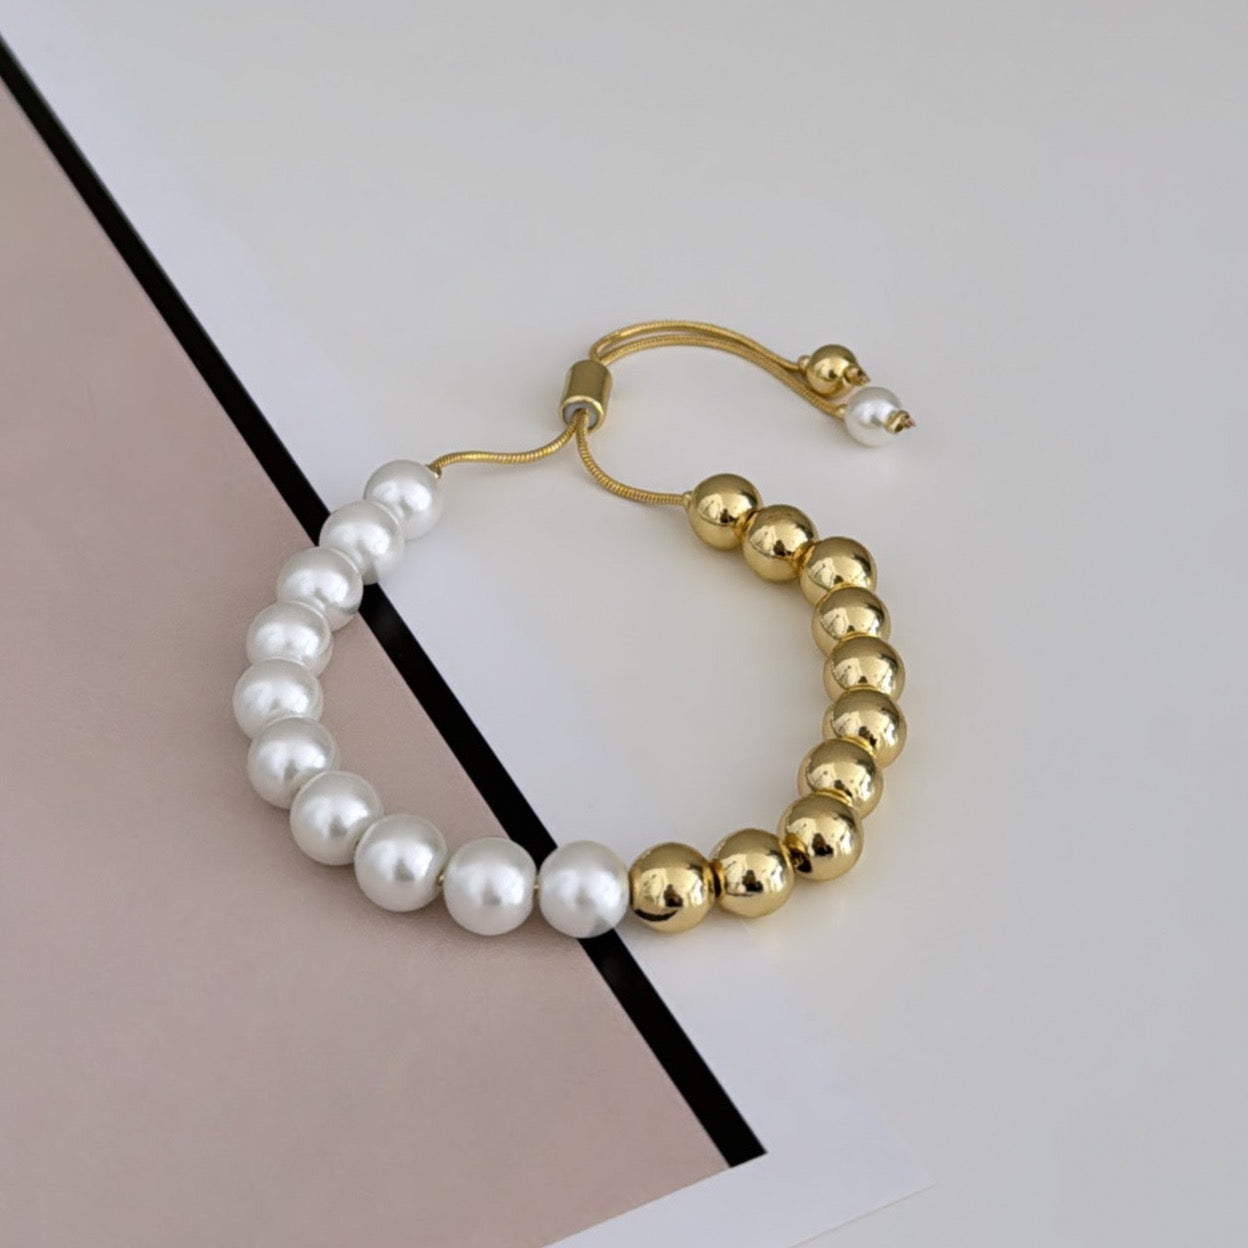 Pearls and Bead Bracelet